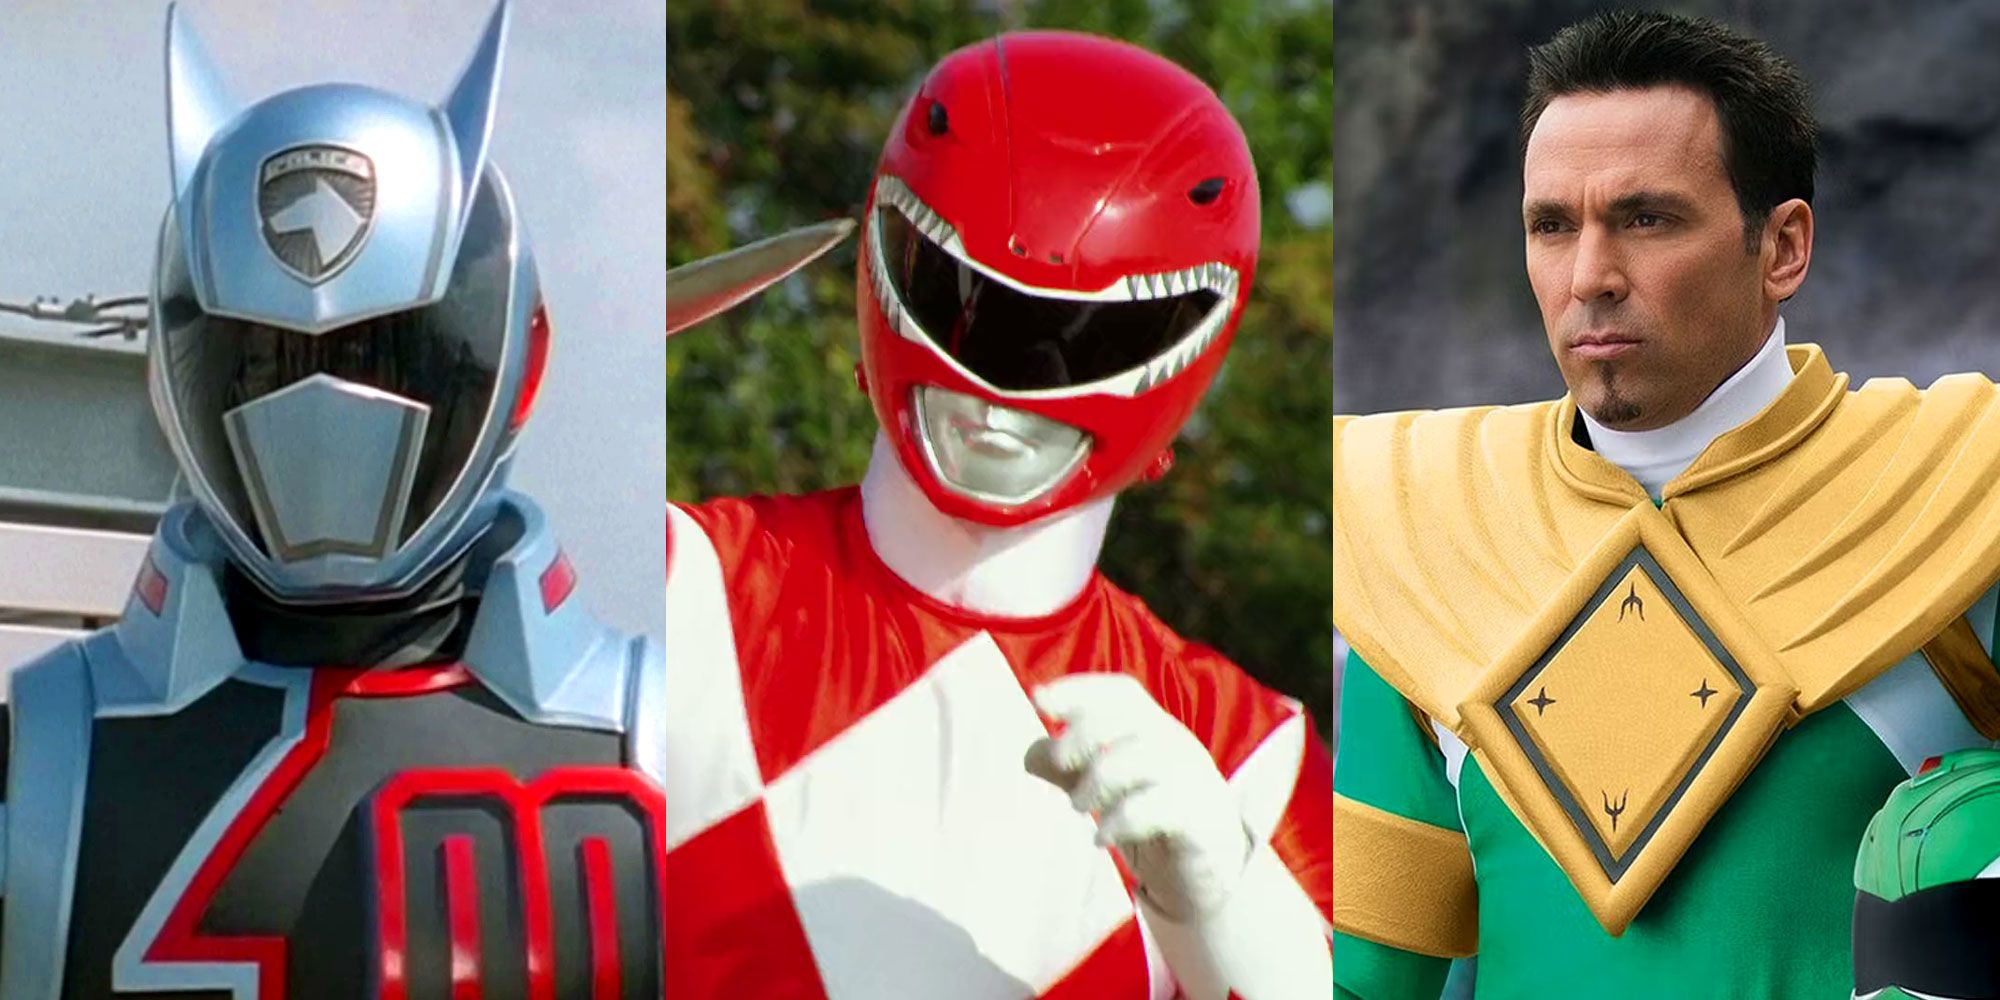 A split image features Doggie Cruger in Power Rangers SPD, the Mighty Morphin Red Power Ranger, and Tommy Oliver in Mighty Morphin Green Ranger gear in Power Rangers Super Megaforce